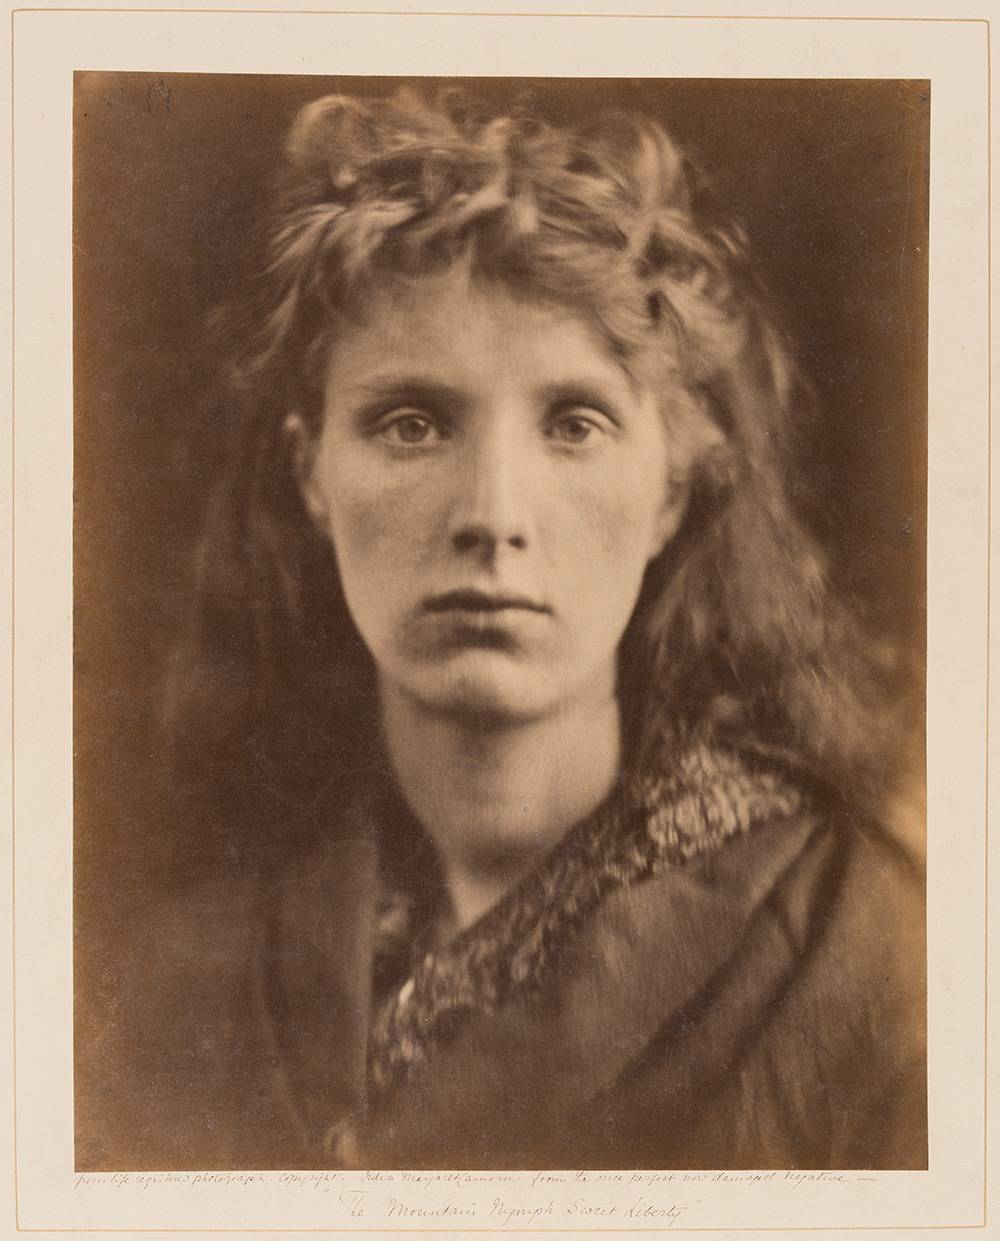 Julia Margaret Cameron, The Mountain Nymph Sweet Liberty [La nymphe des montagnes, la douce liberté], 1866
Tirage albuminé,  © The Royal Photographic Society Collection at the V&A, acquired with the generous assistance of the National Lottery Heritage Fund and Art Fund.